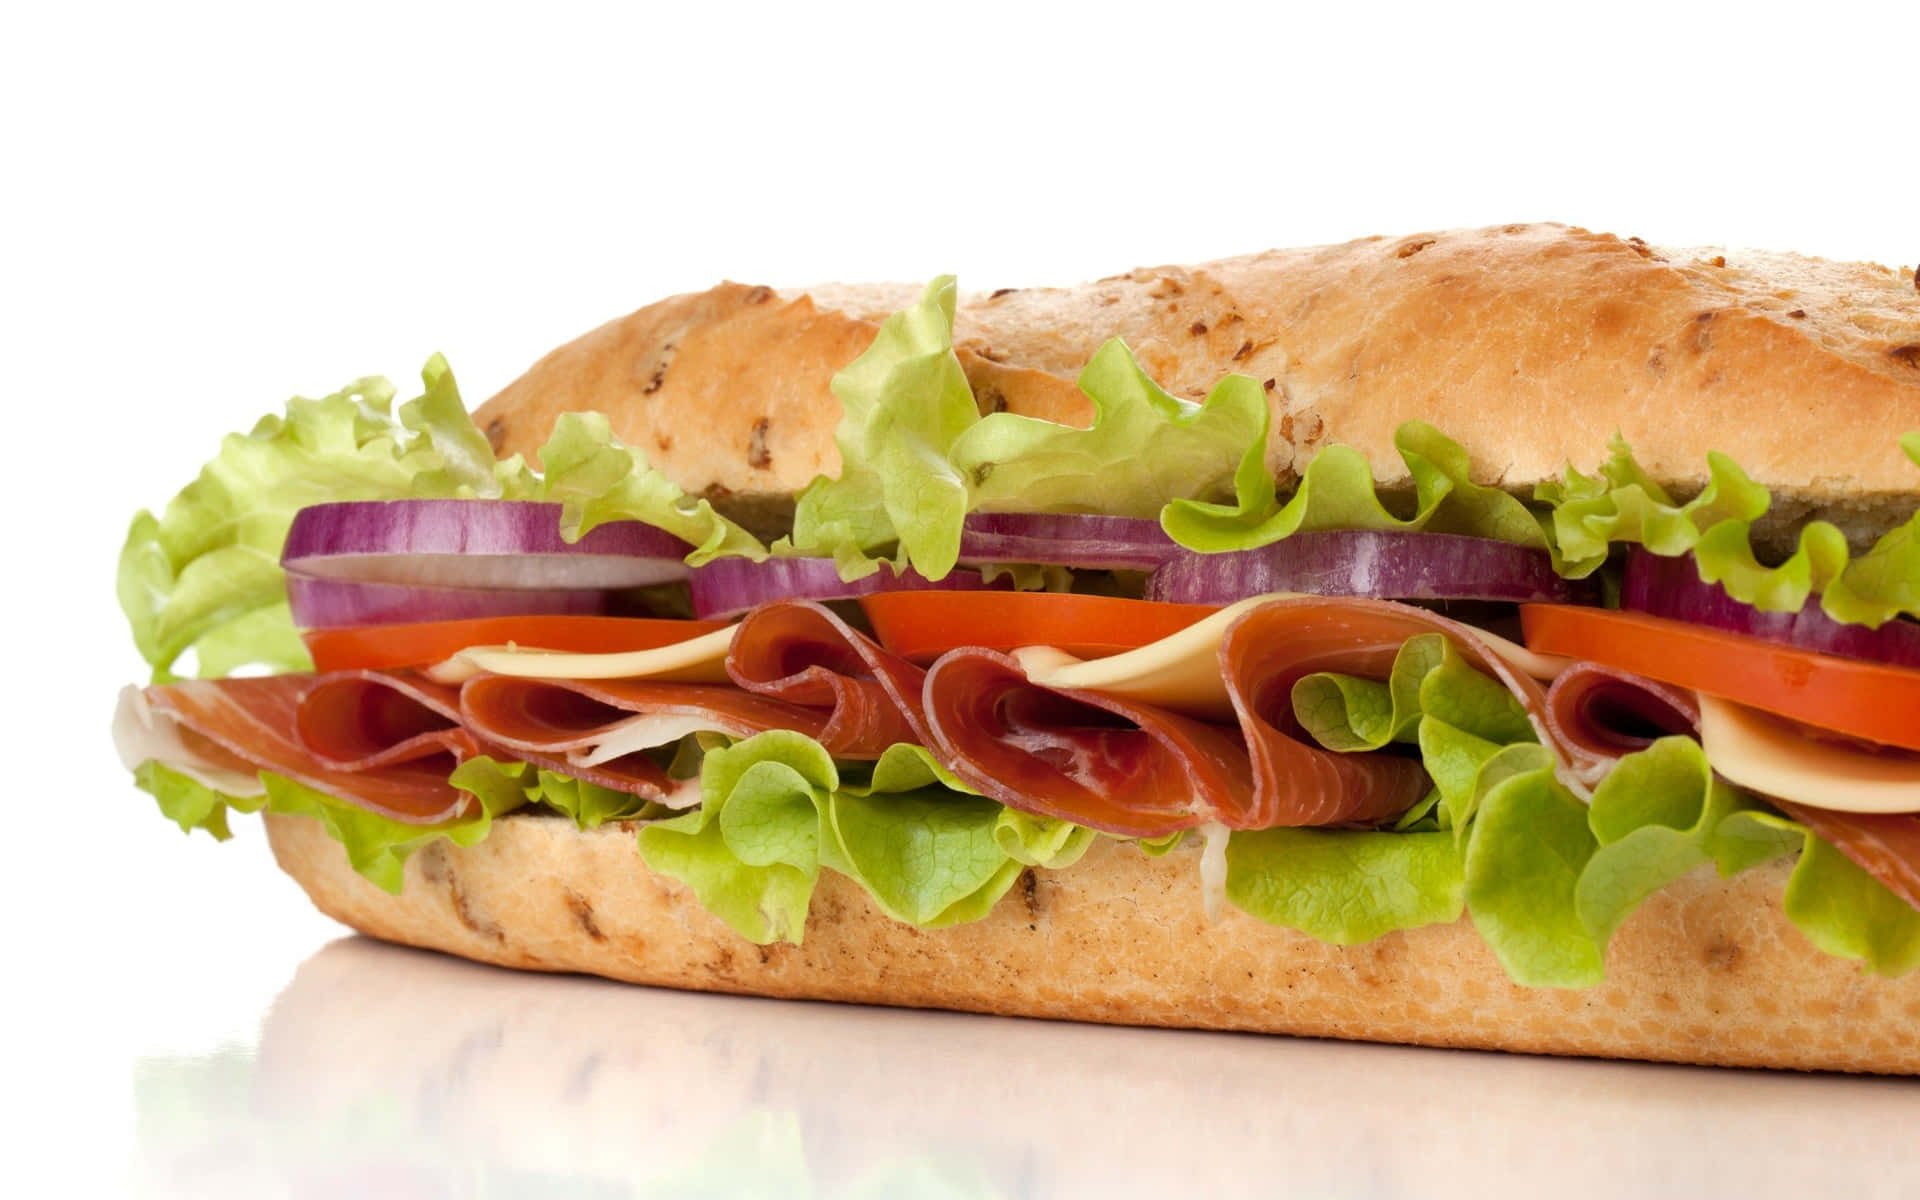 A Sandwich With Meat, Lettuce, Tomatoes, And Onions